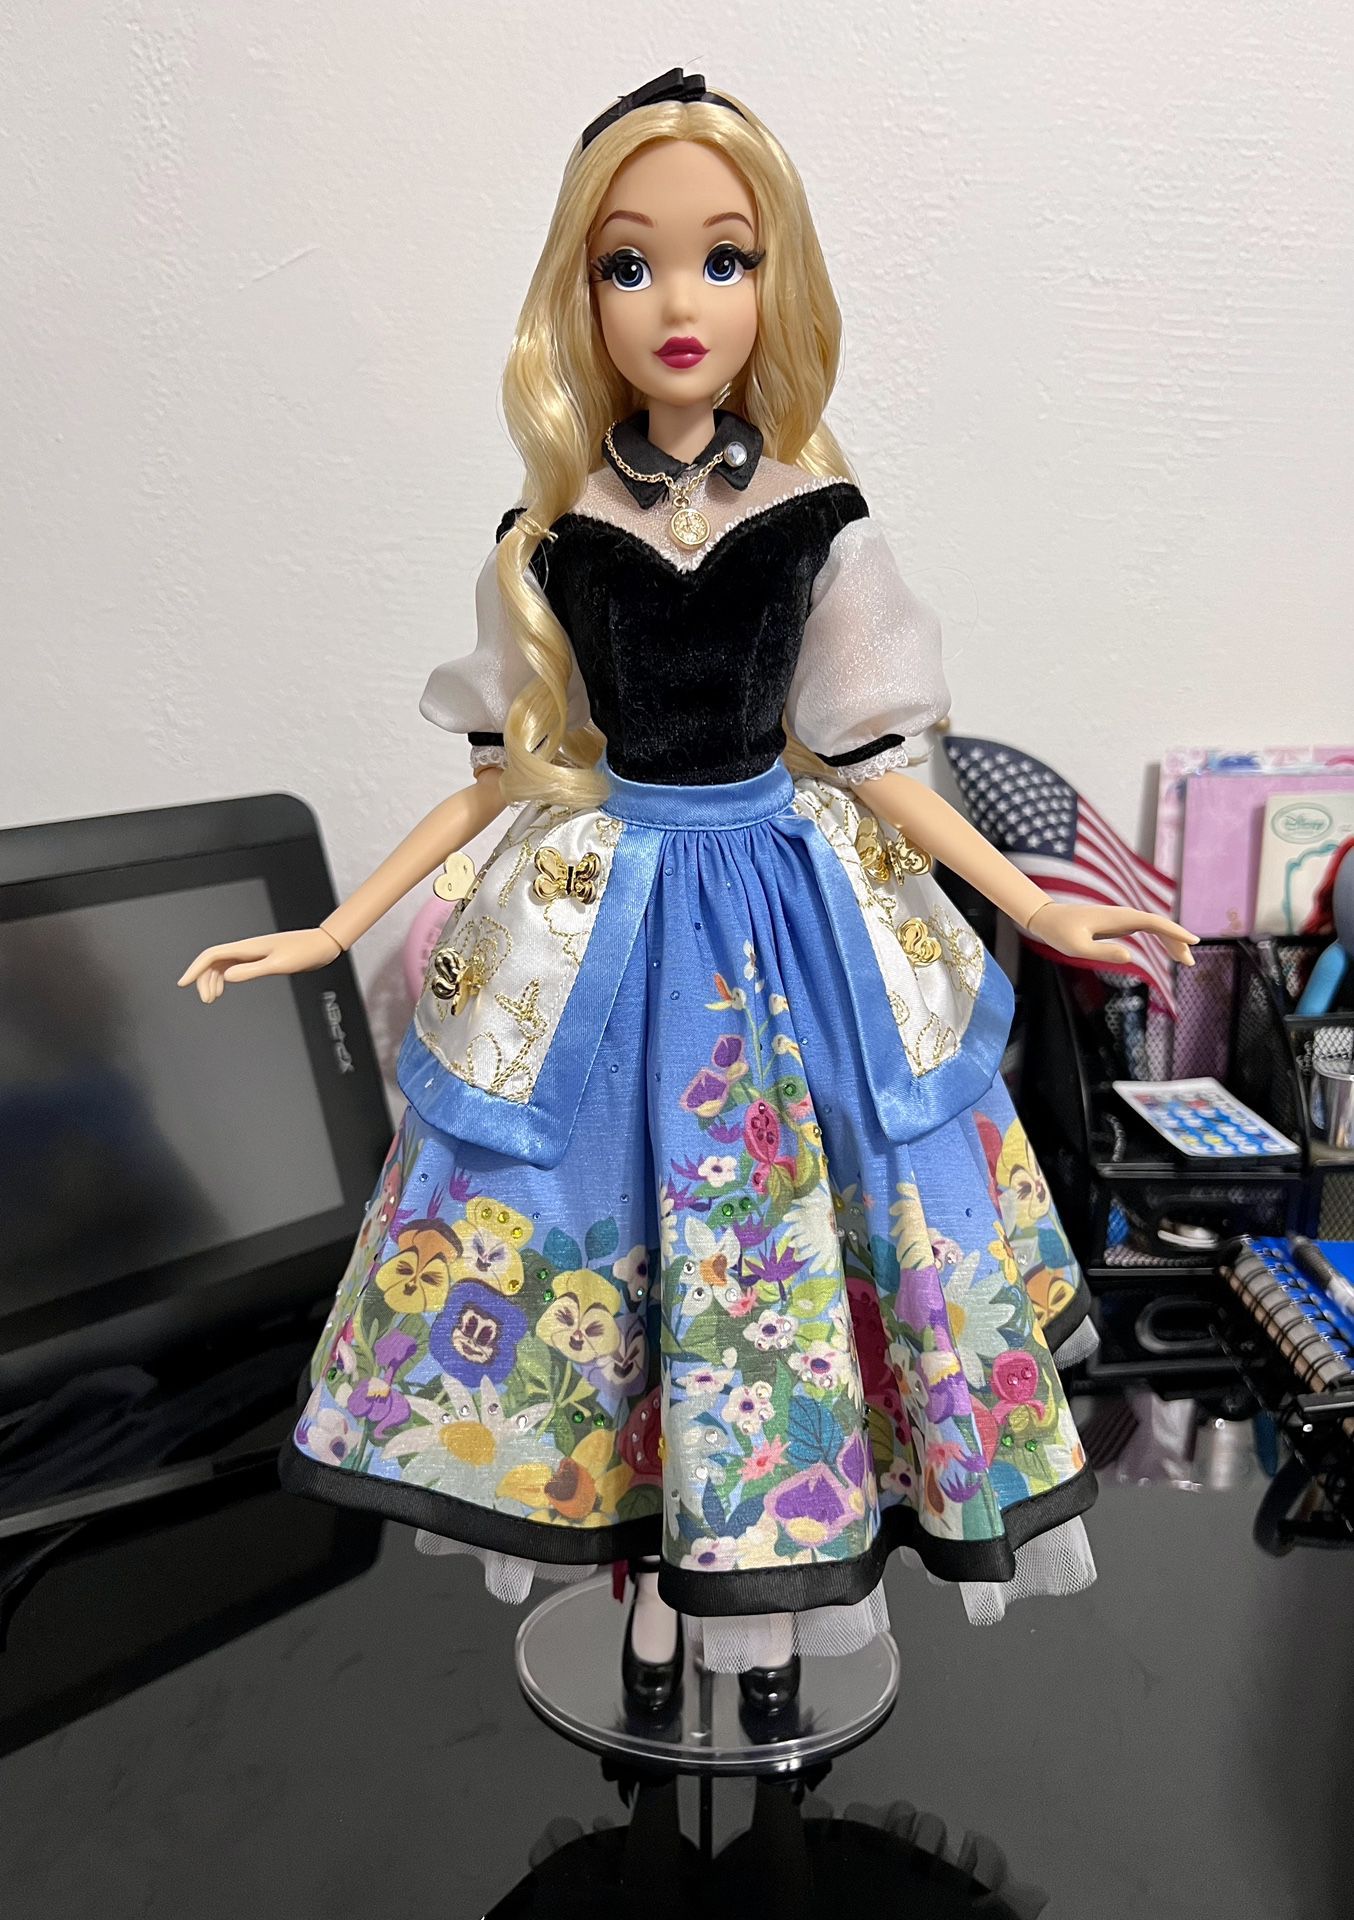 shopDisney - The Alice in Wonderland Limited edition doll will be